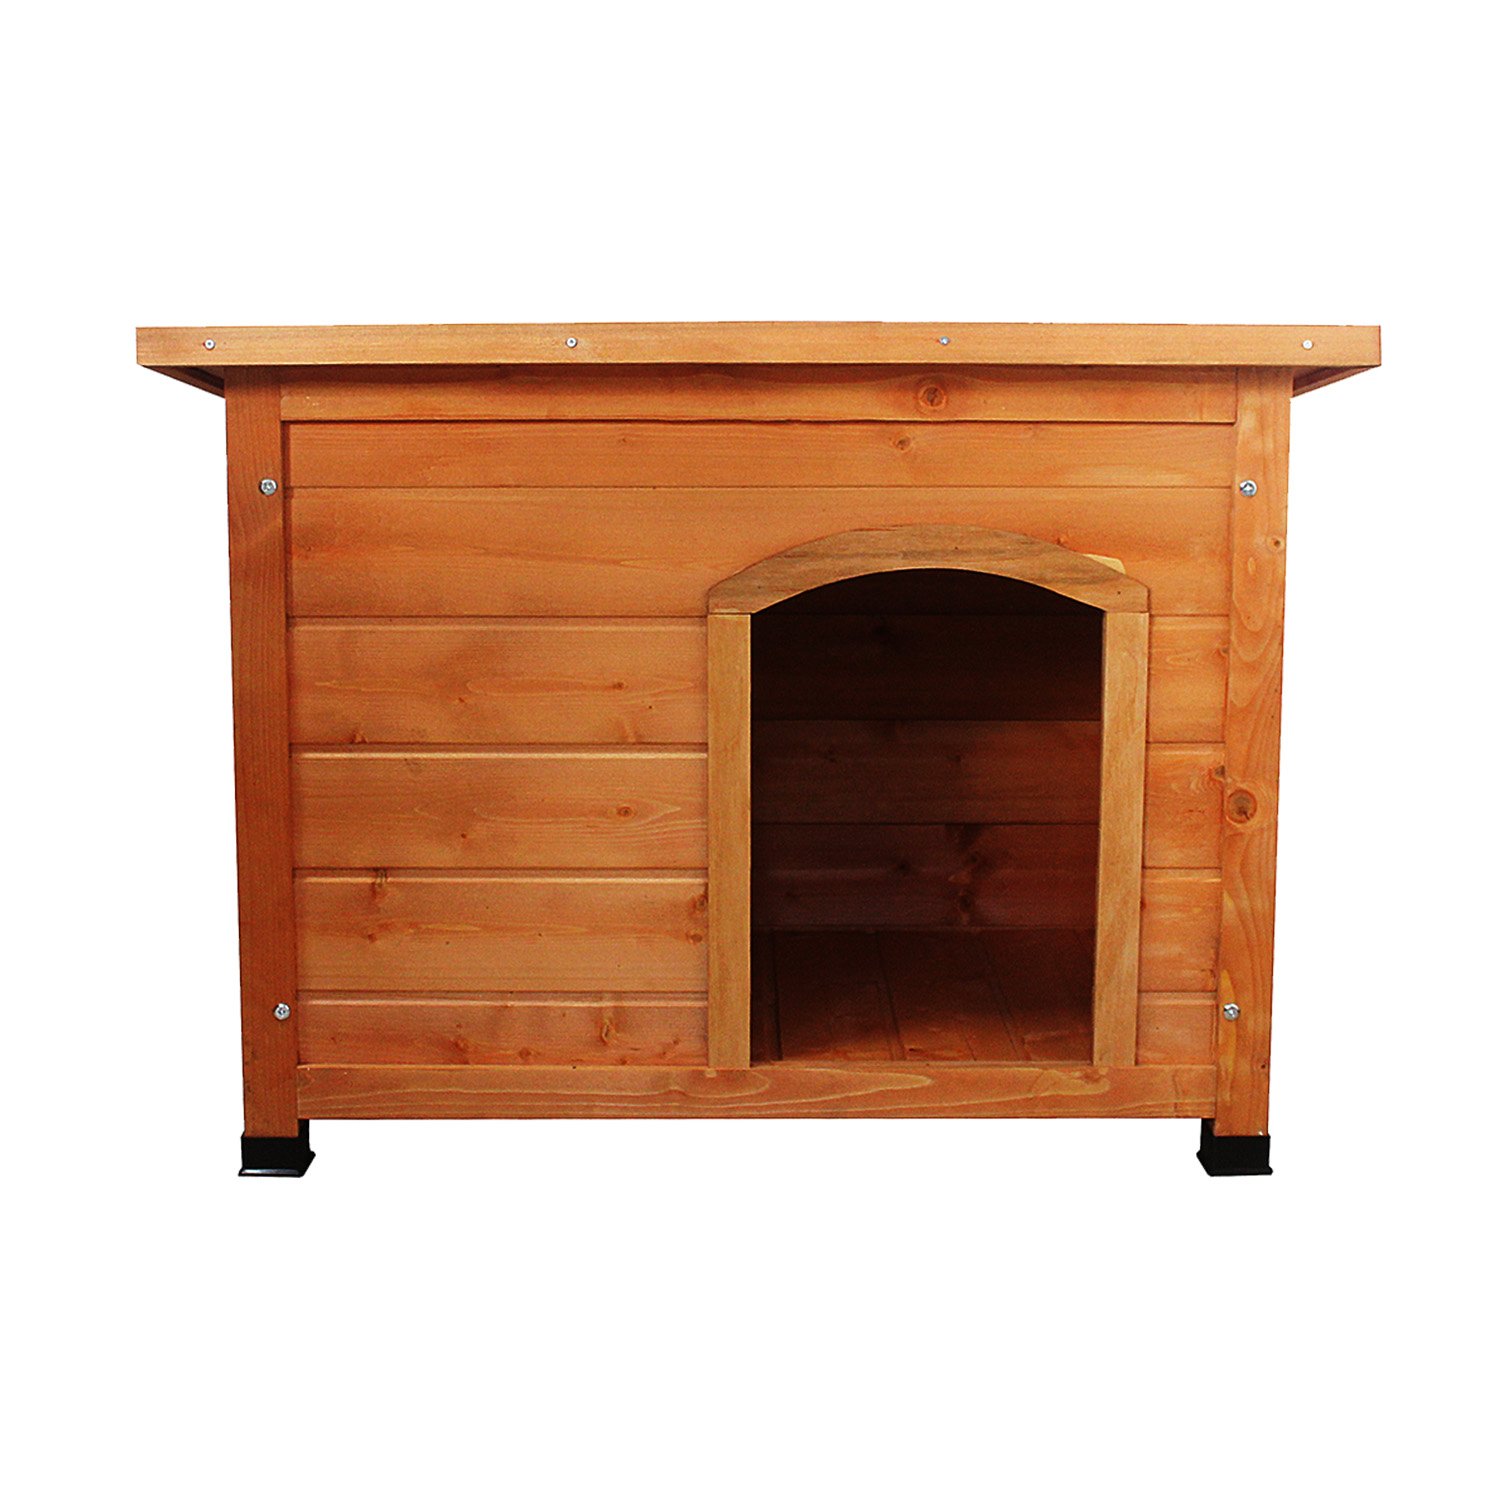 Little Buddies Wooden Flat Roof Dog Kennel - Small 2